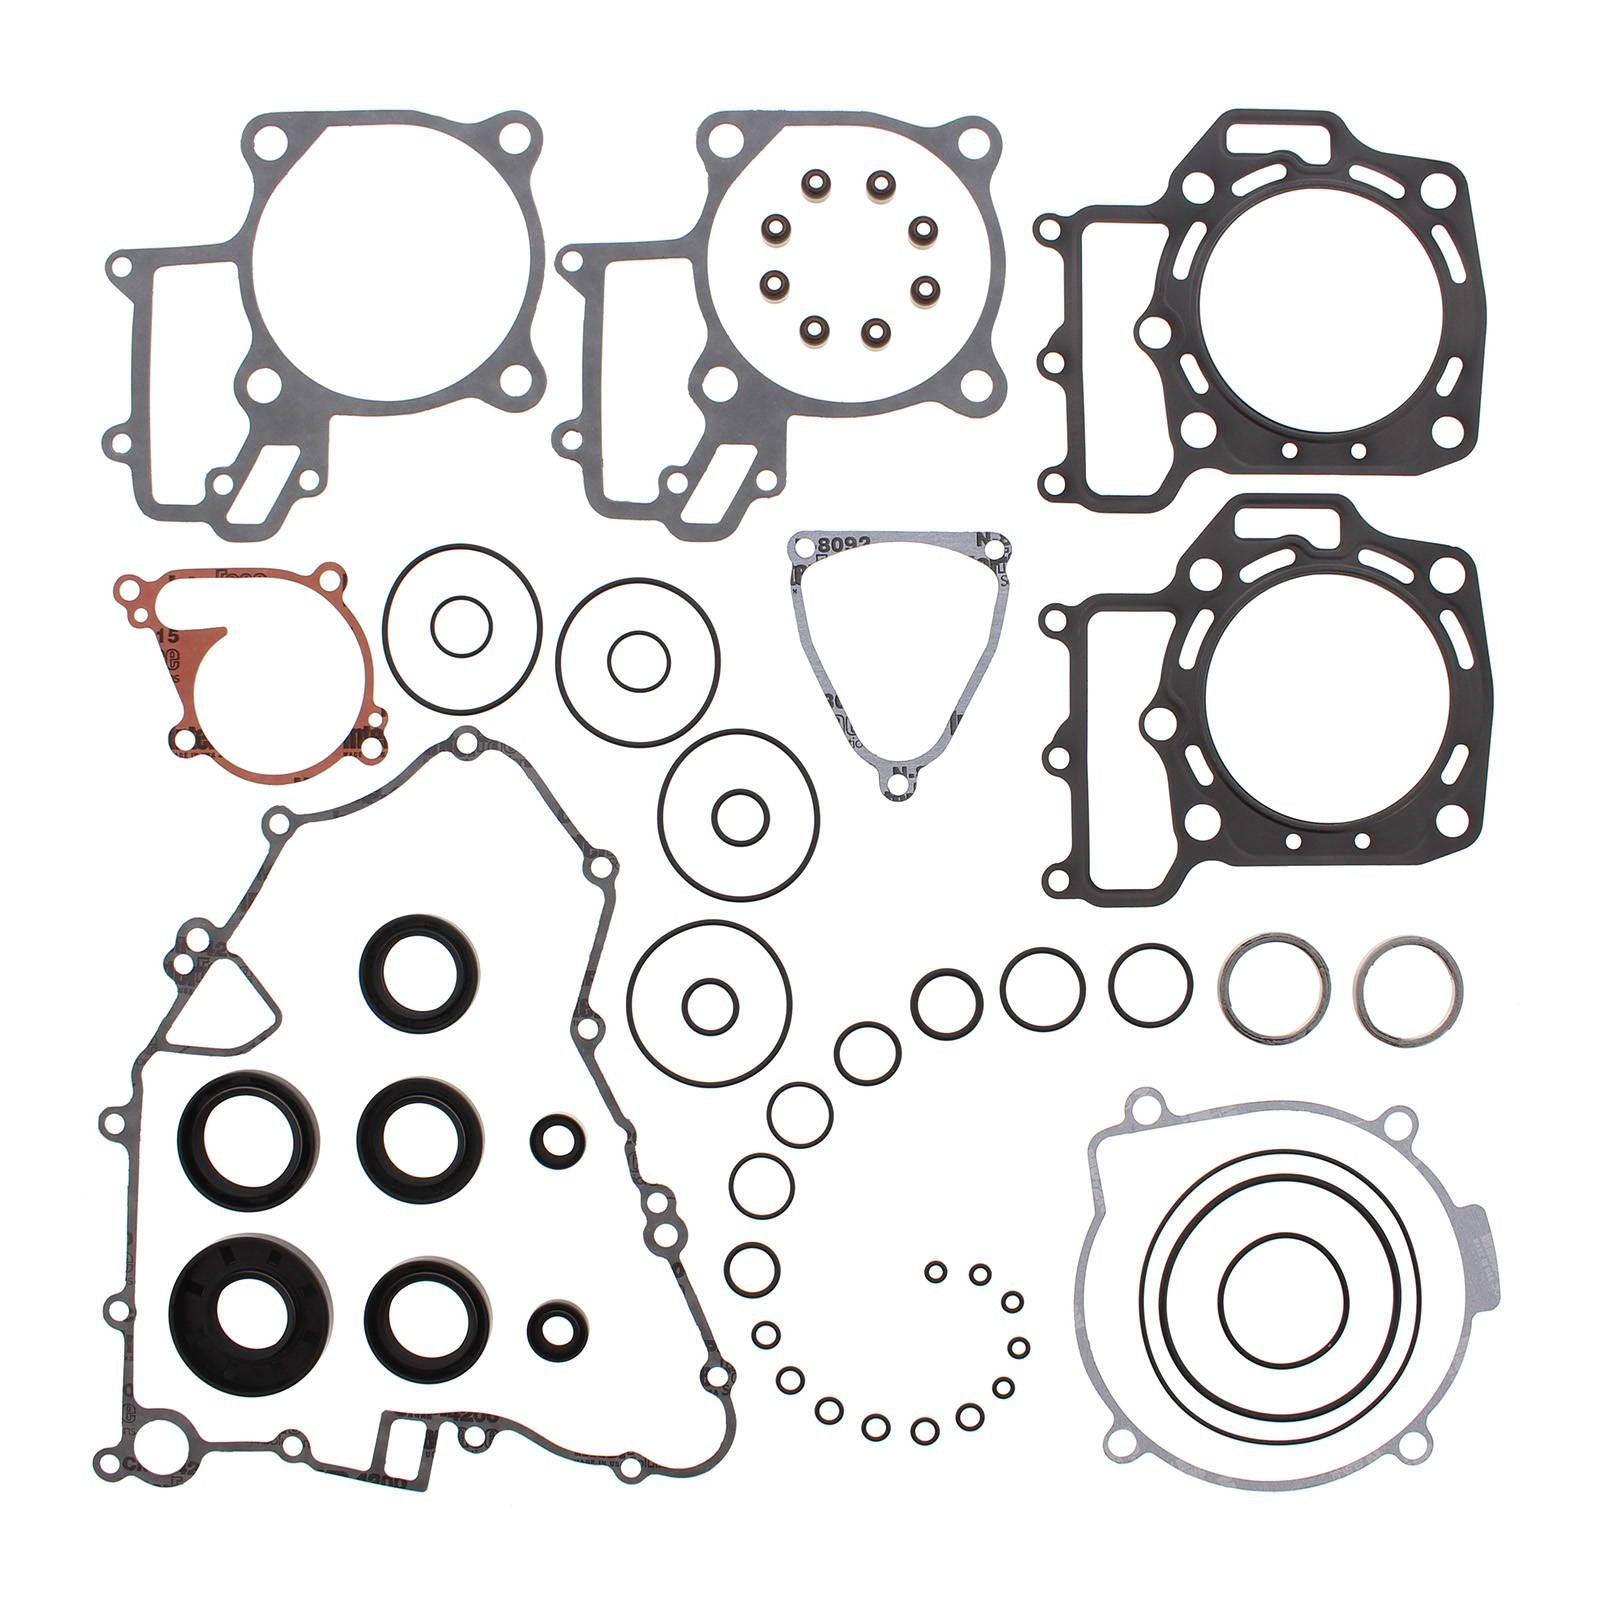 New VERTEX Engine Complete Gasket Set With Oil Seals For Kawasaki #VER811881